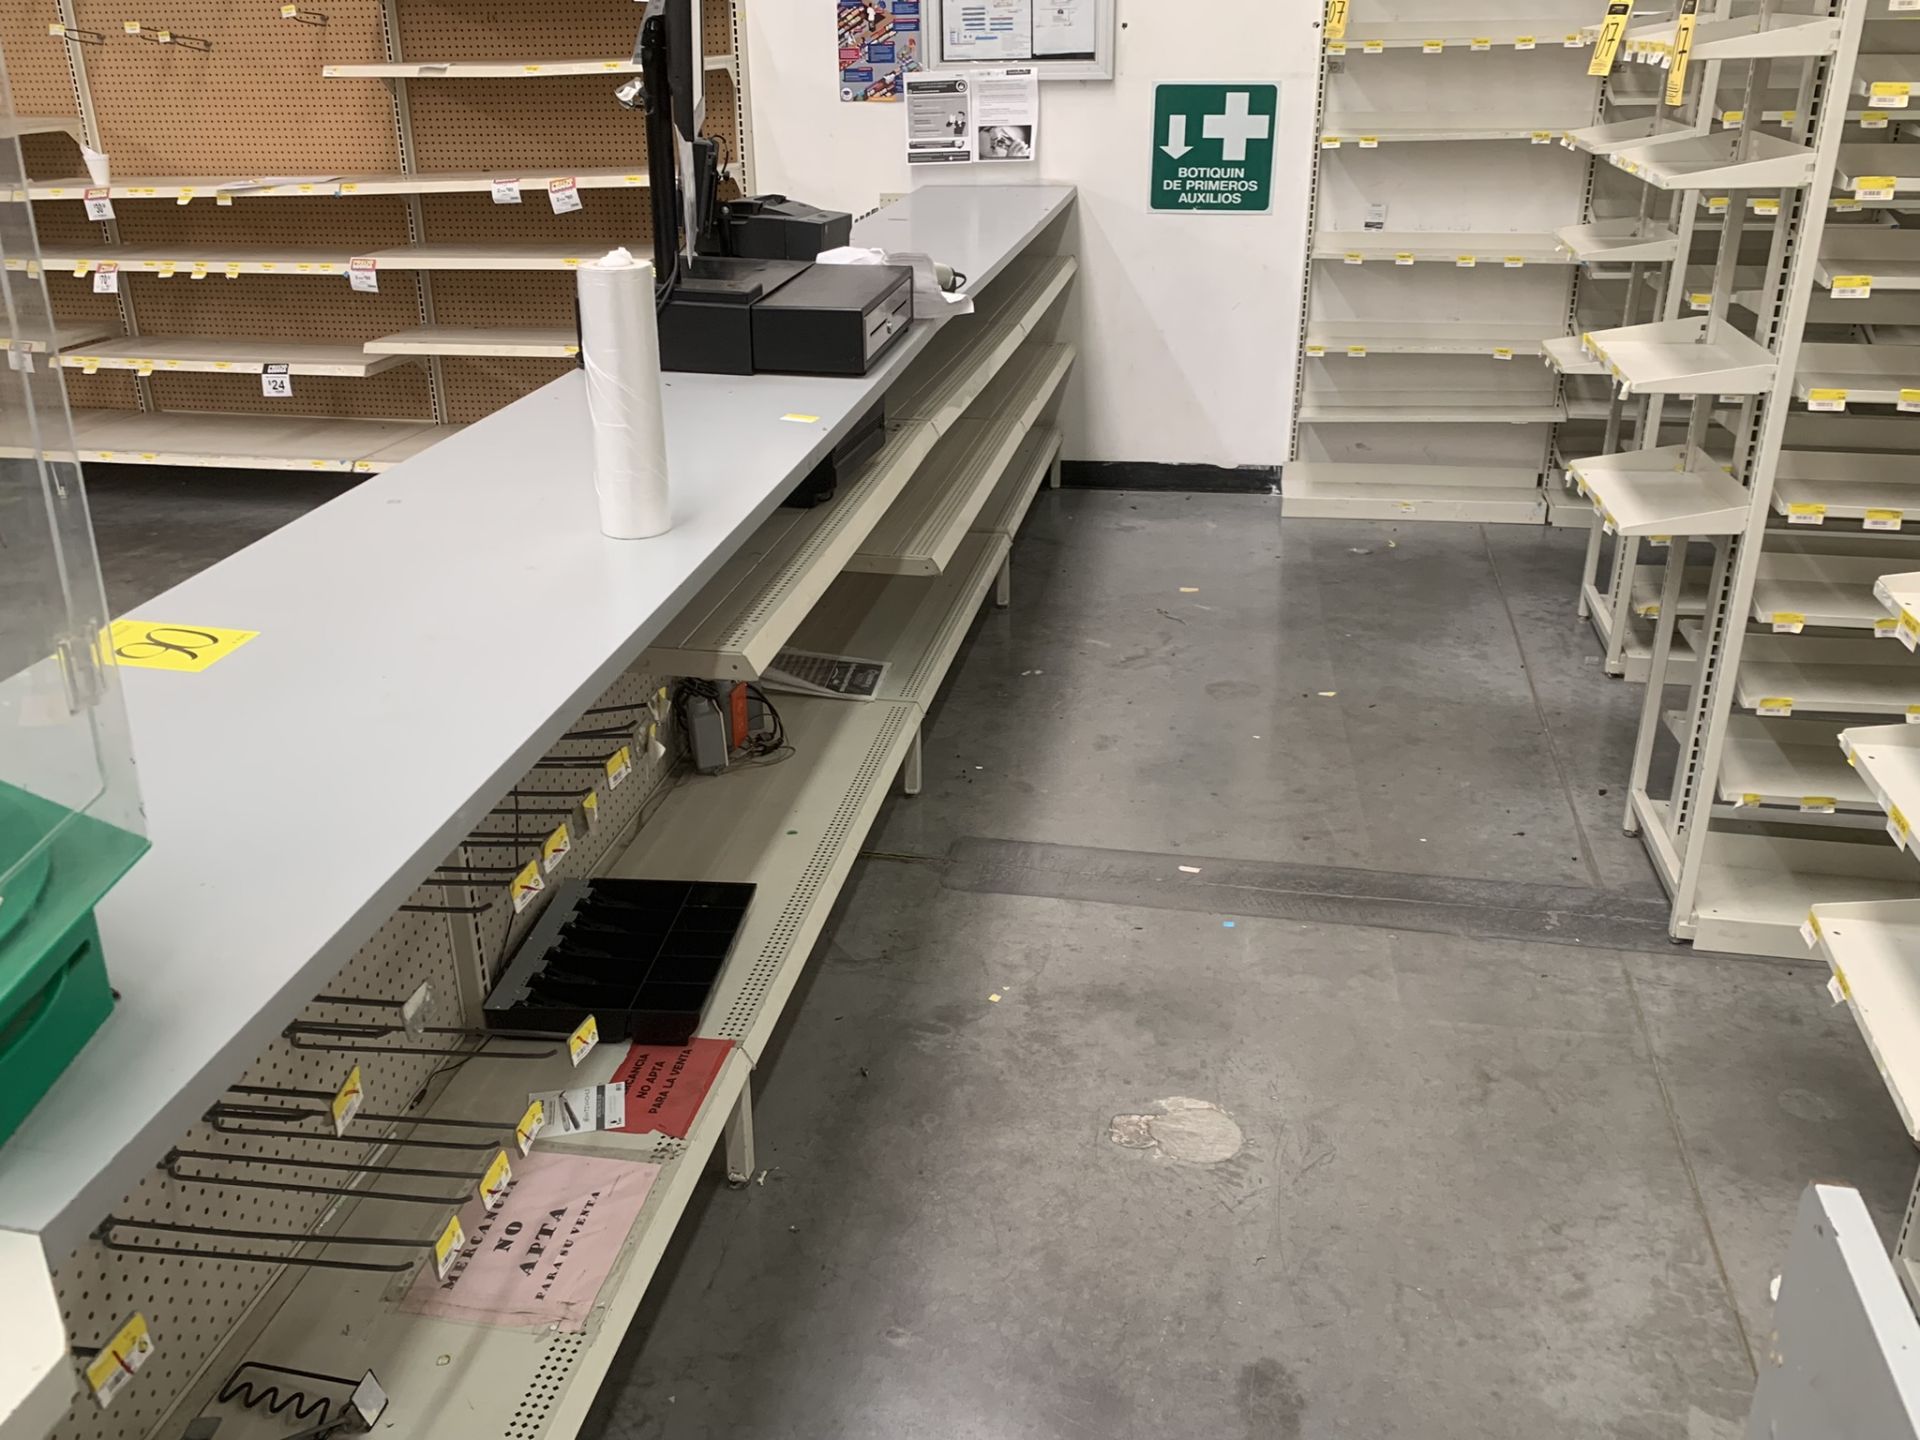 L-shaped counter for a pharmacy with a display of 31 shelves - Image 13 of 17